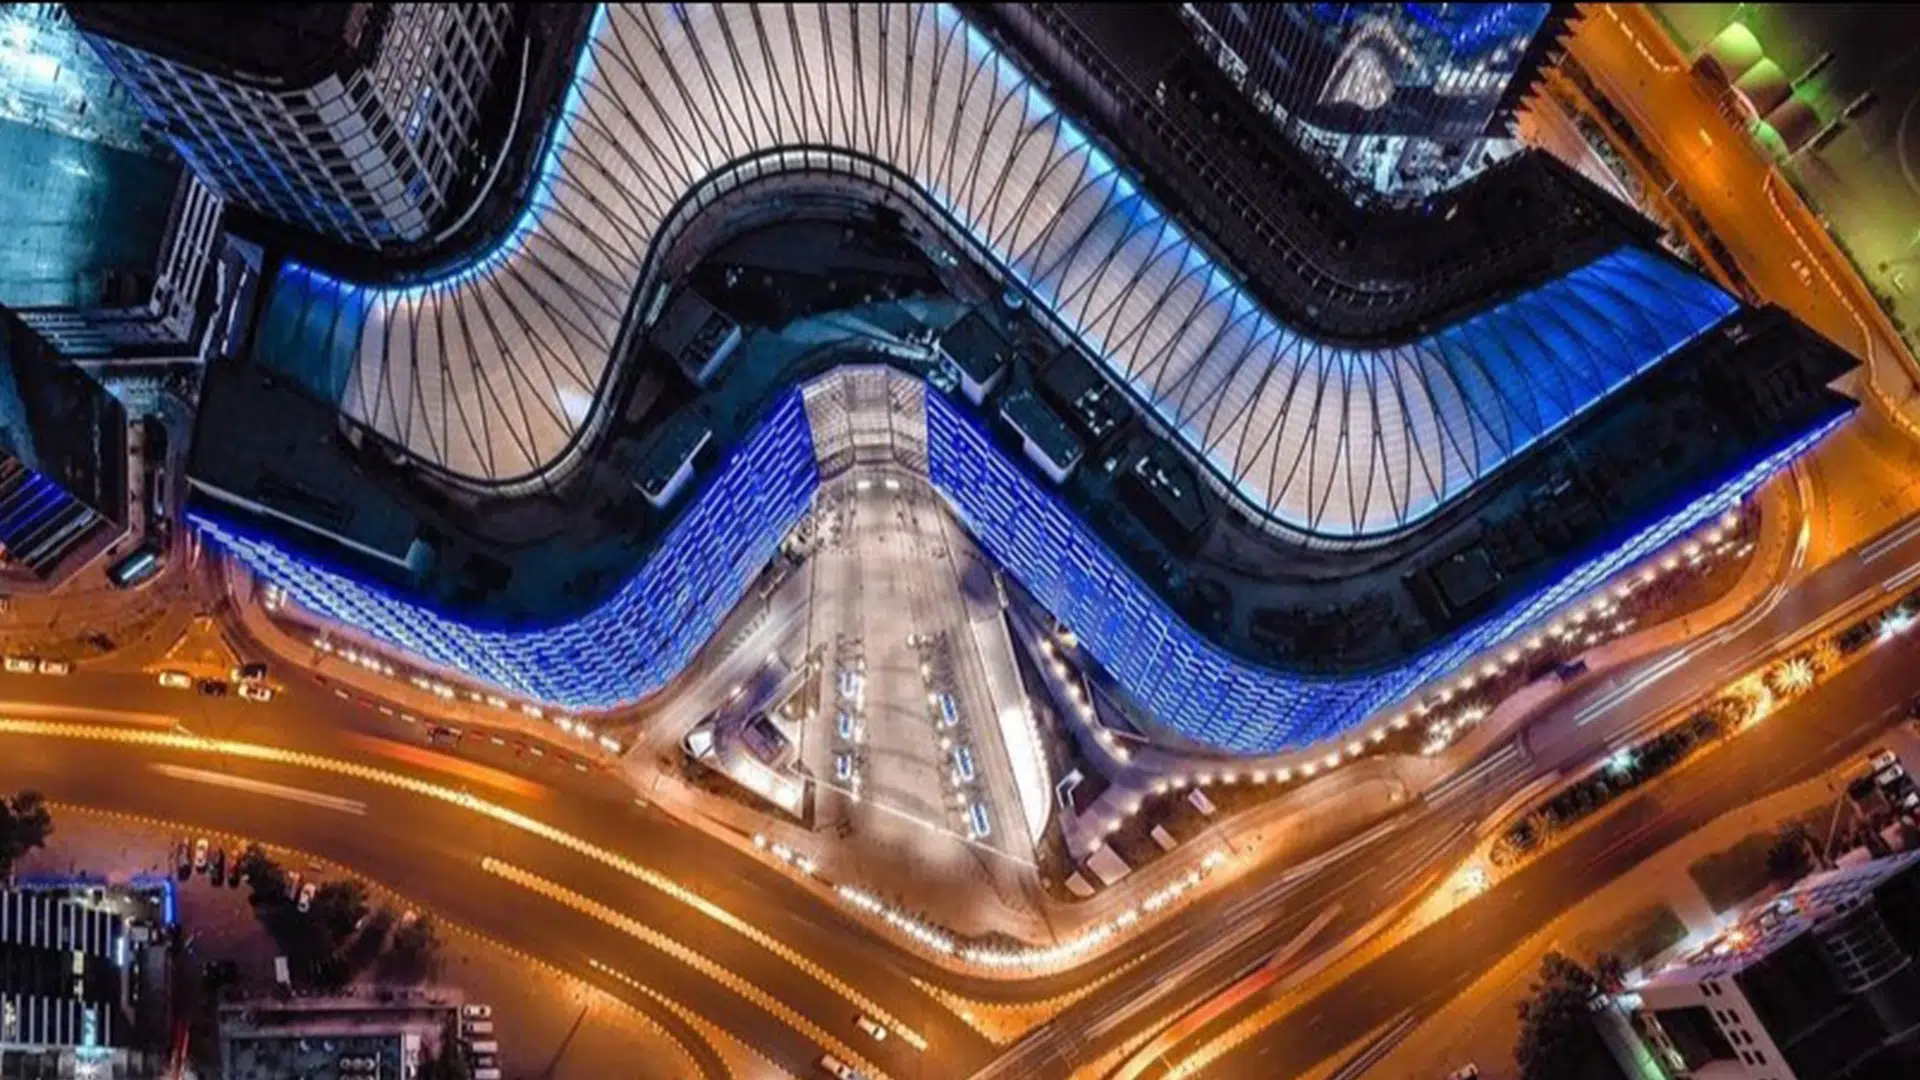  The Assima Mall ETFE roofing reminds of the natural flow of a river from a birds-eye perspective.